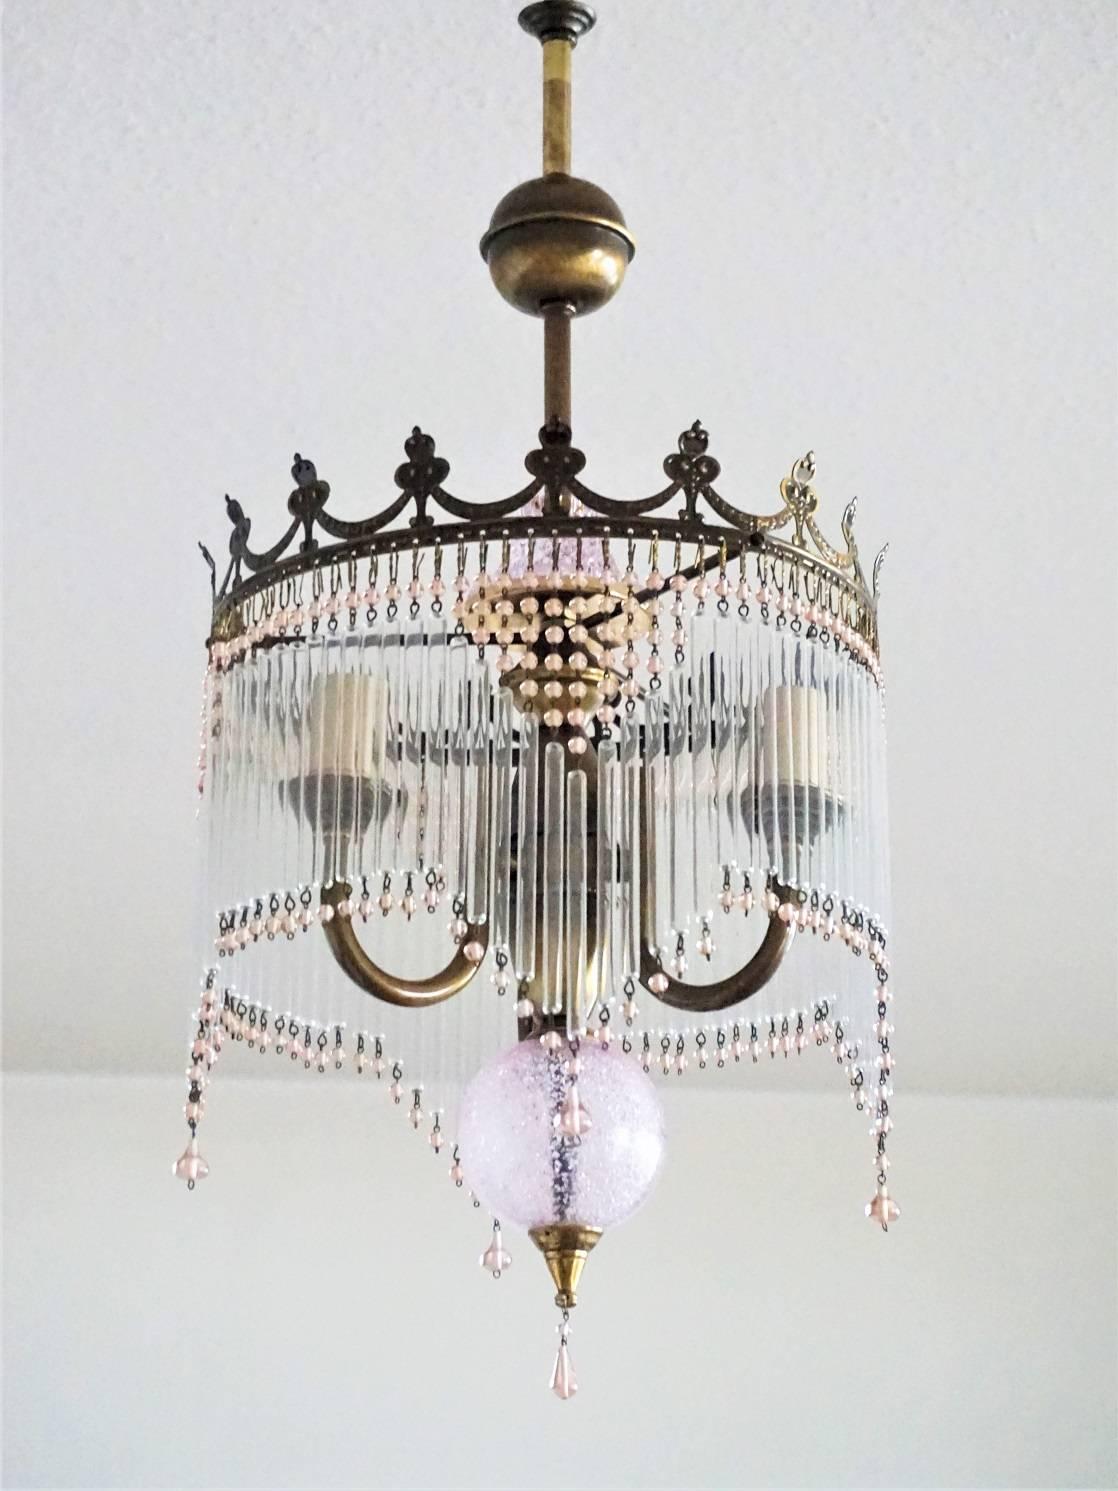 Lovely Art Nouveau style brass three-light chandelier with glass rods and rose colour glass pearls - impressive lighting effect!

European wiring: Four E14 bulb sockets 
Measures:
Total height 28.75 in (73 cm)
Diameter 11 in (28 cm).
 